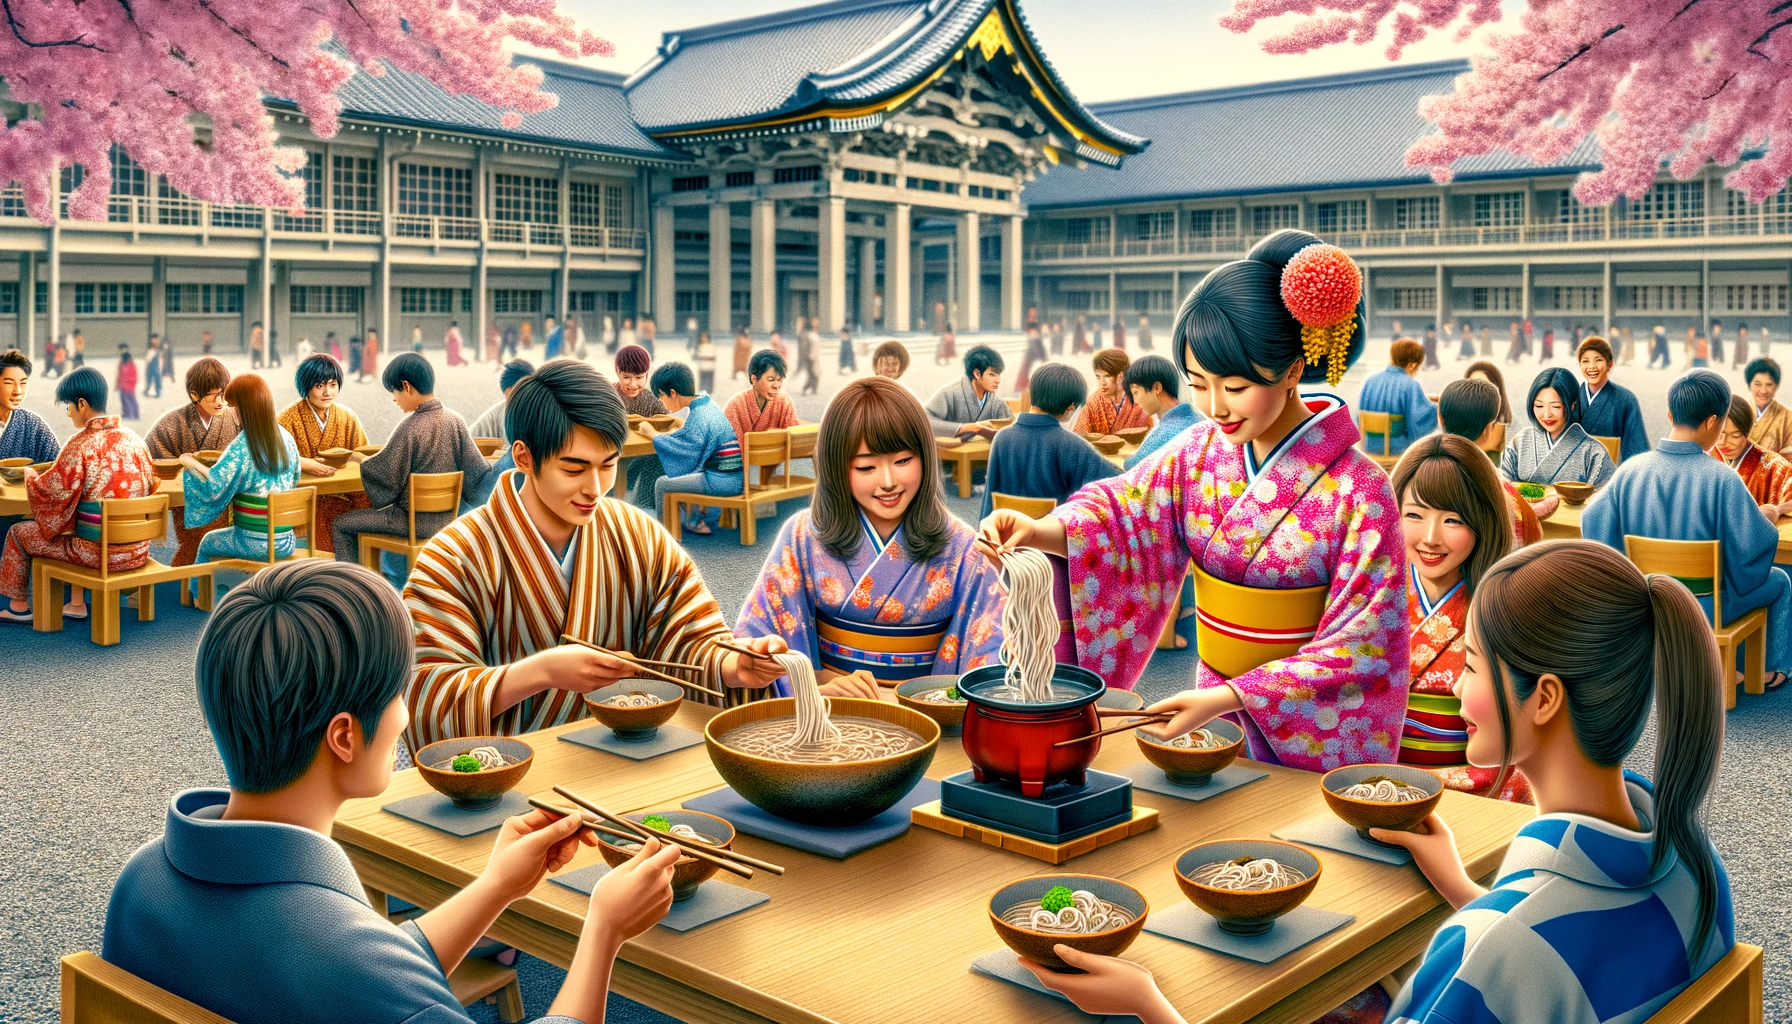 An engaging scene at Iwate University featuring students enjoying 'wanko soba', a local noodle specialty. The image shows a group of diverse students seated around a traditional low dining table, wearing vibrant yukatas. Each student has a small bowl, and a server in traditional attire is adding soba noodles to their bowls from a large pot. The setting is outdoors under cherry blossoms, reflecting a festive atmosphere. The university's buildings can be seen in the background, integrating academic life with local culture.